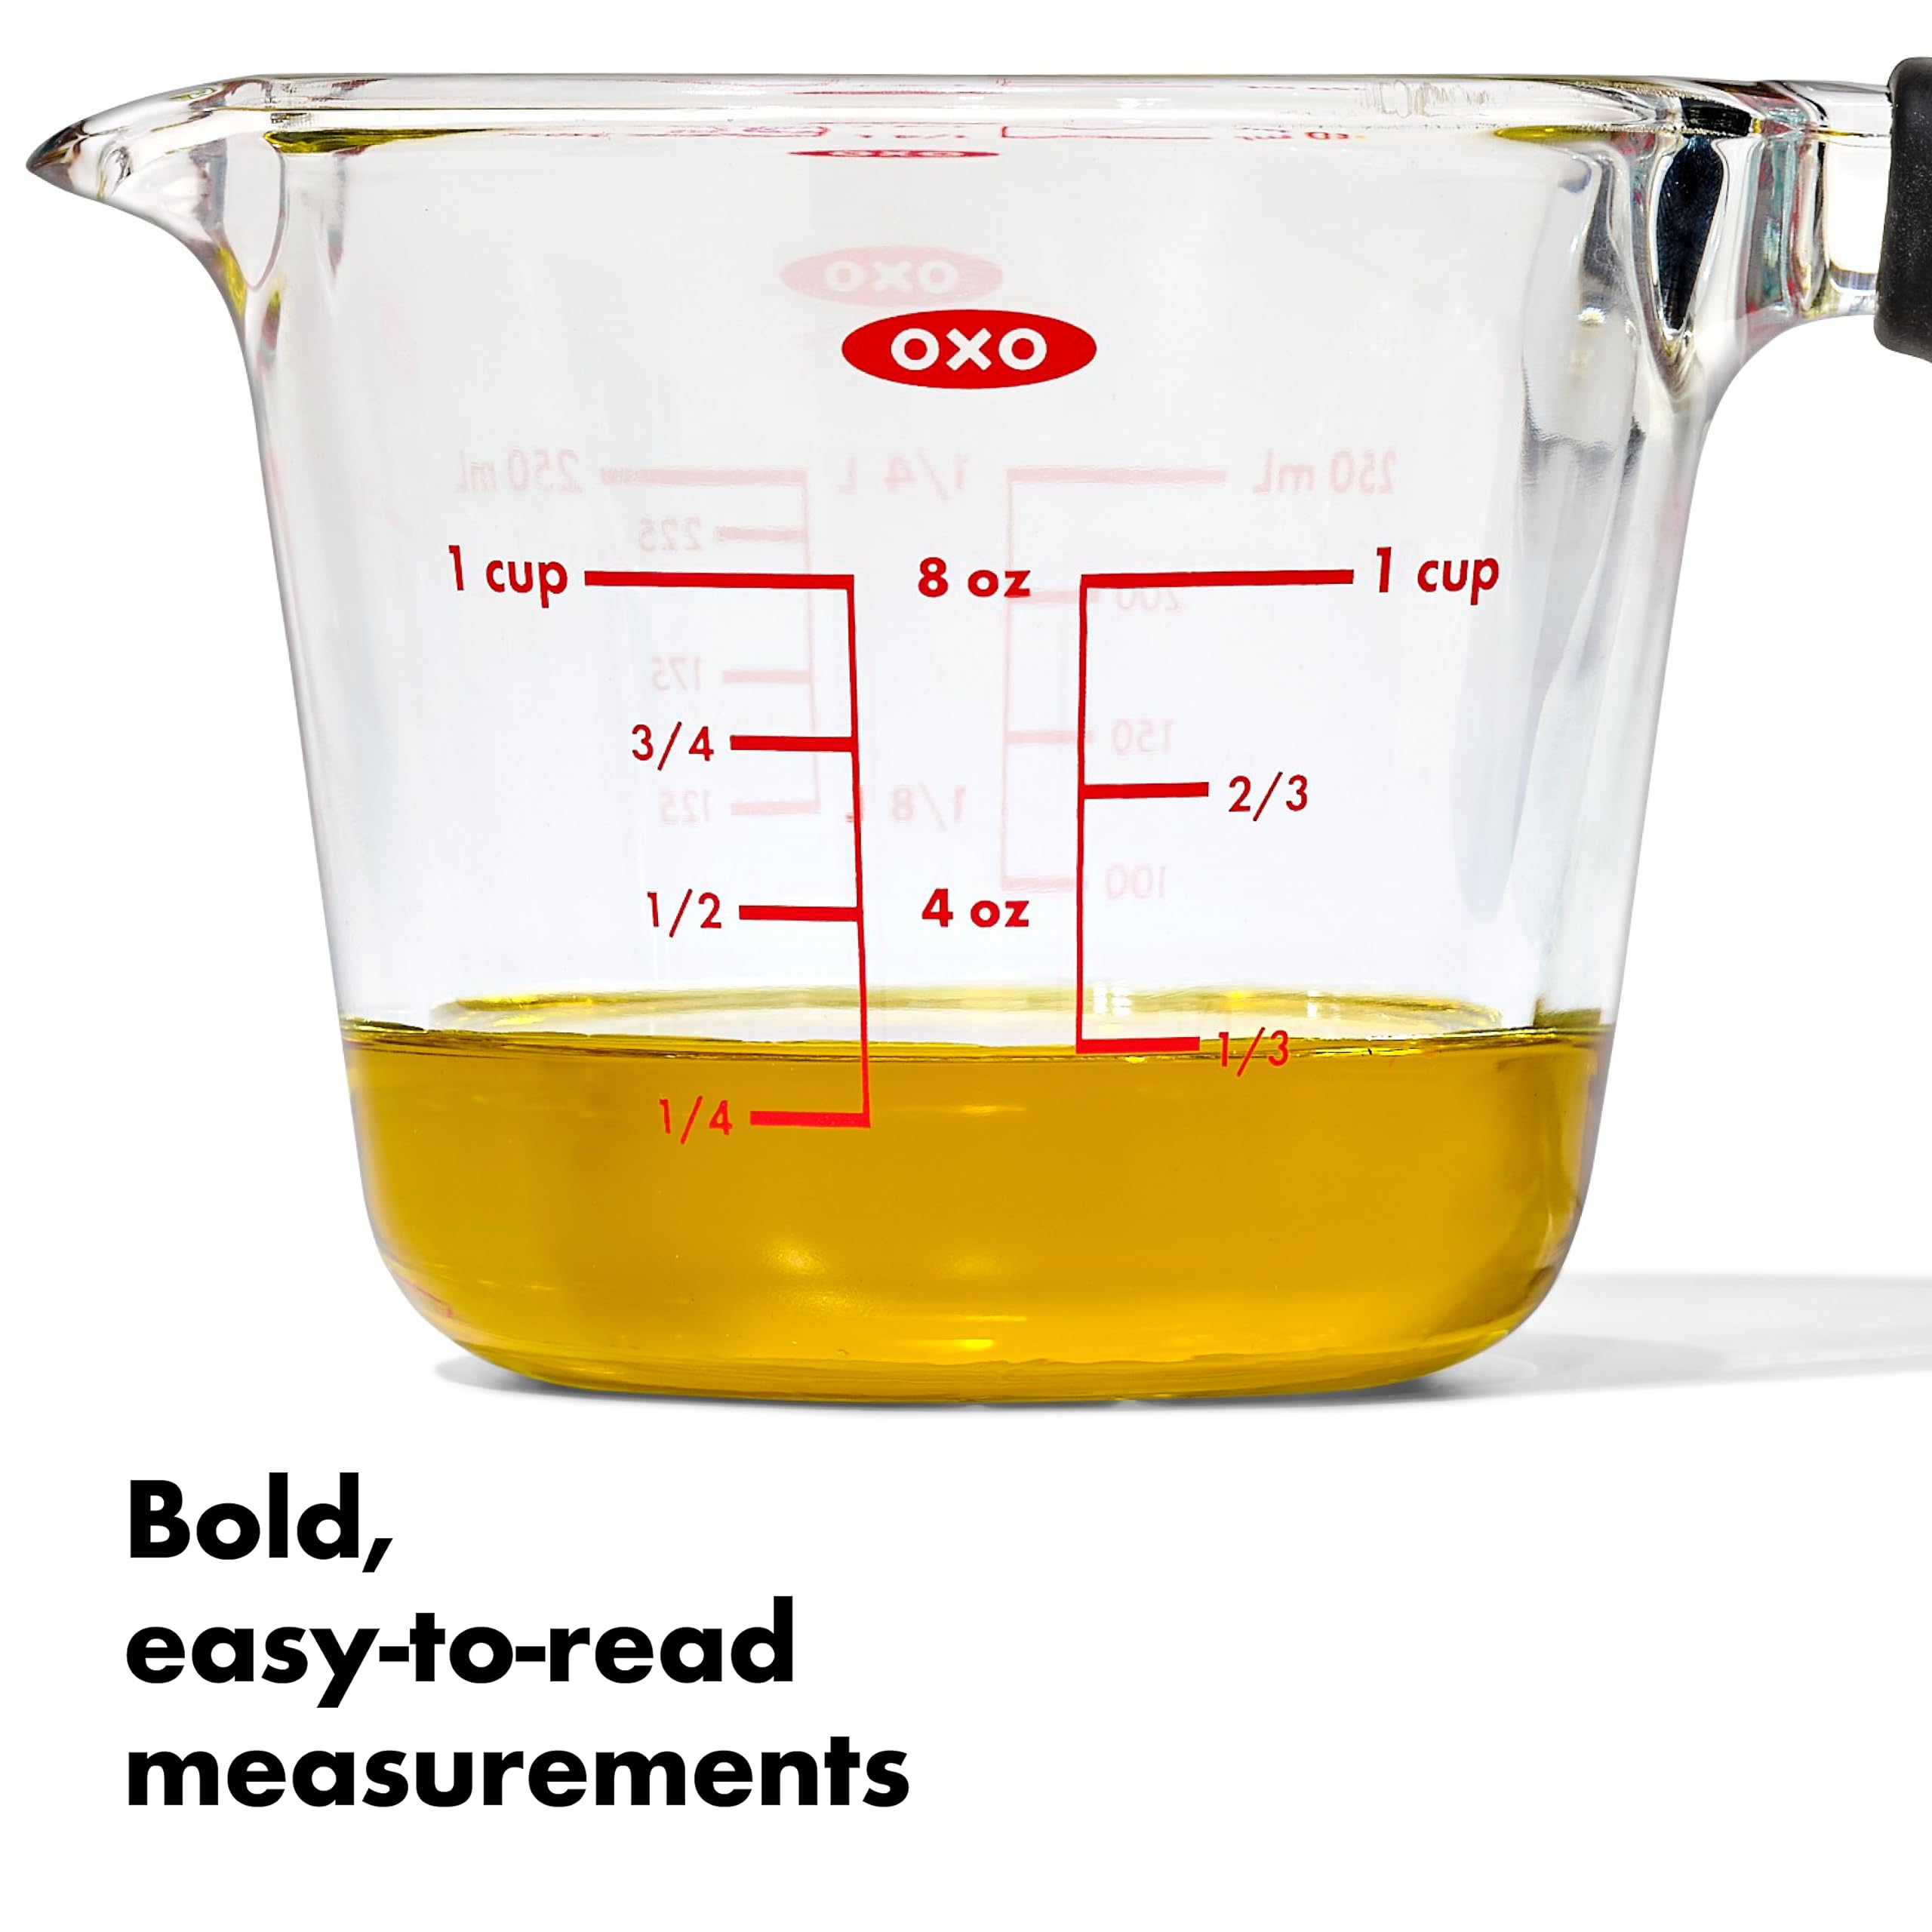 OXO Good Grips 1 Cup Glass Measuring Cup